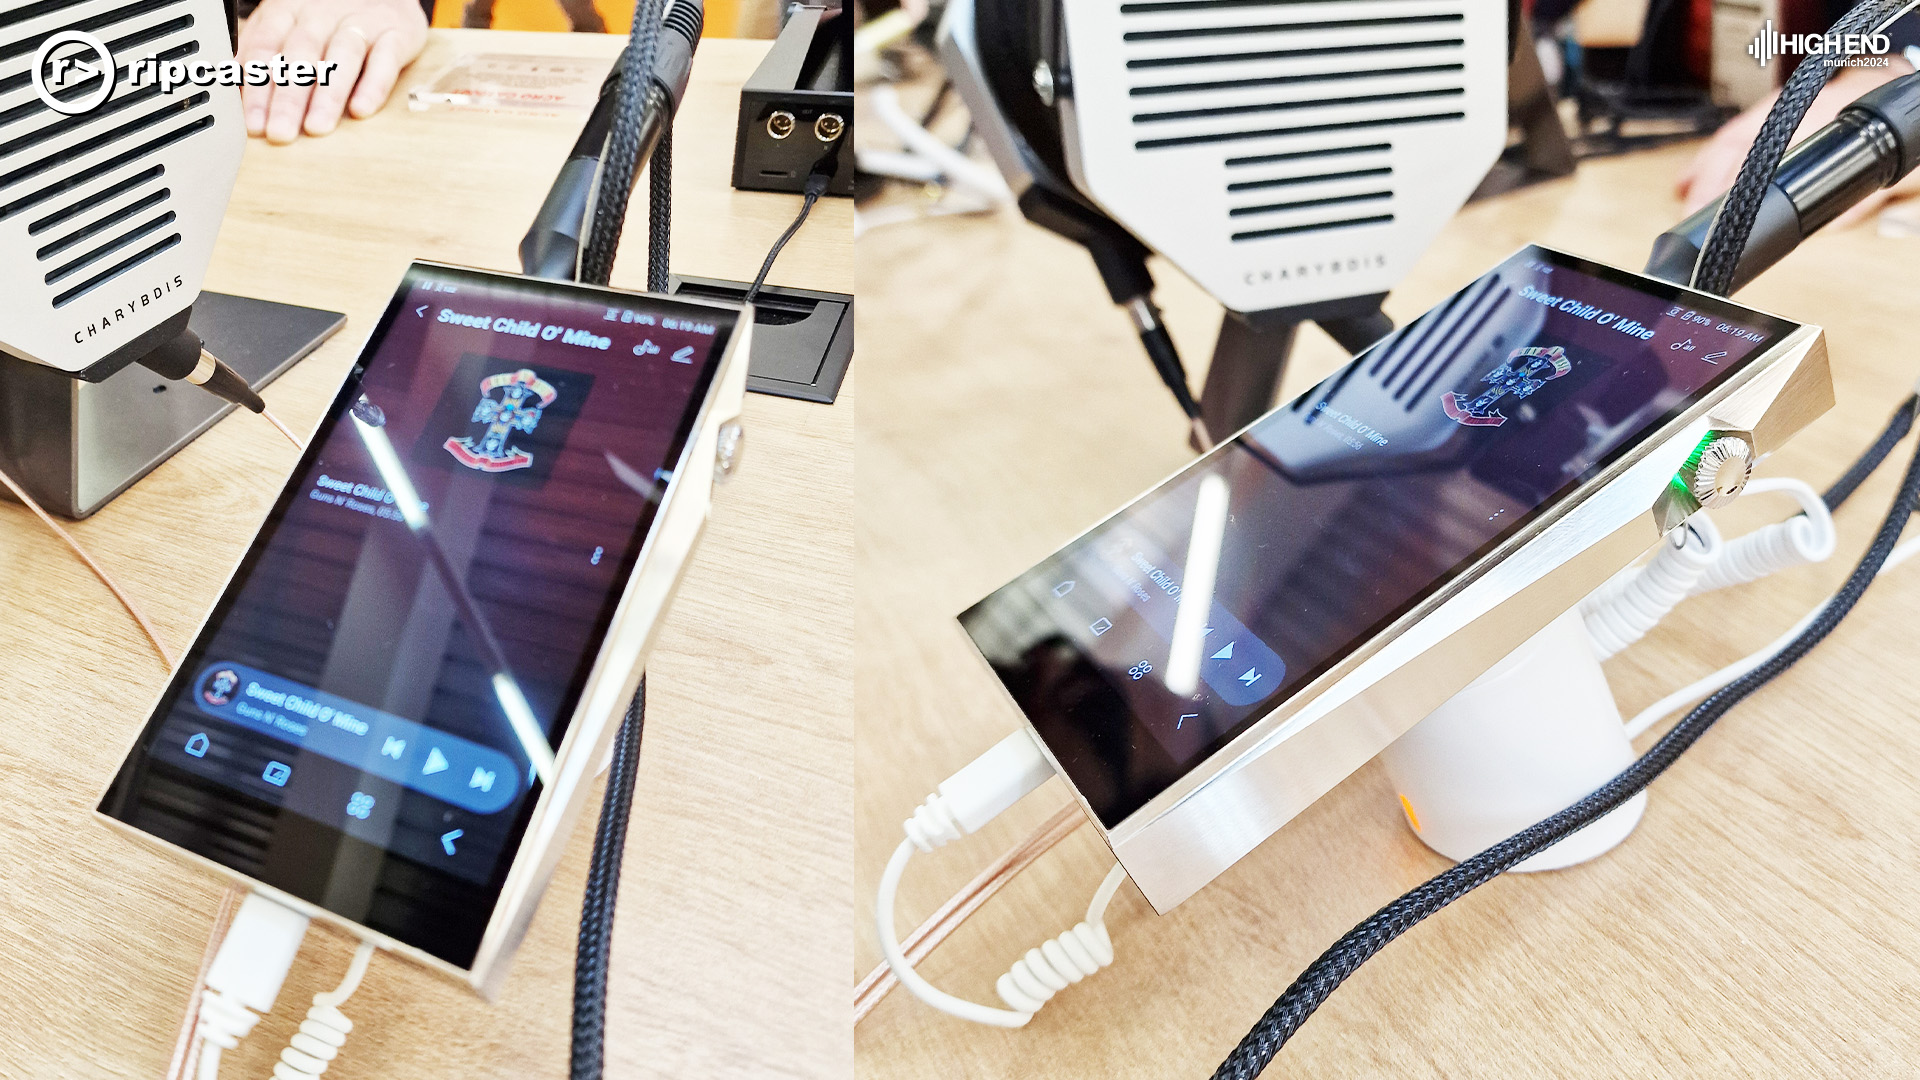 Two photos of an Astell & Kern music player